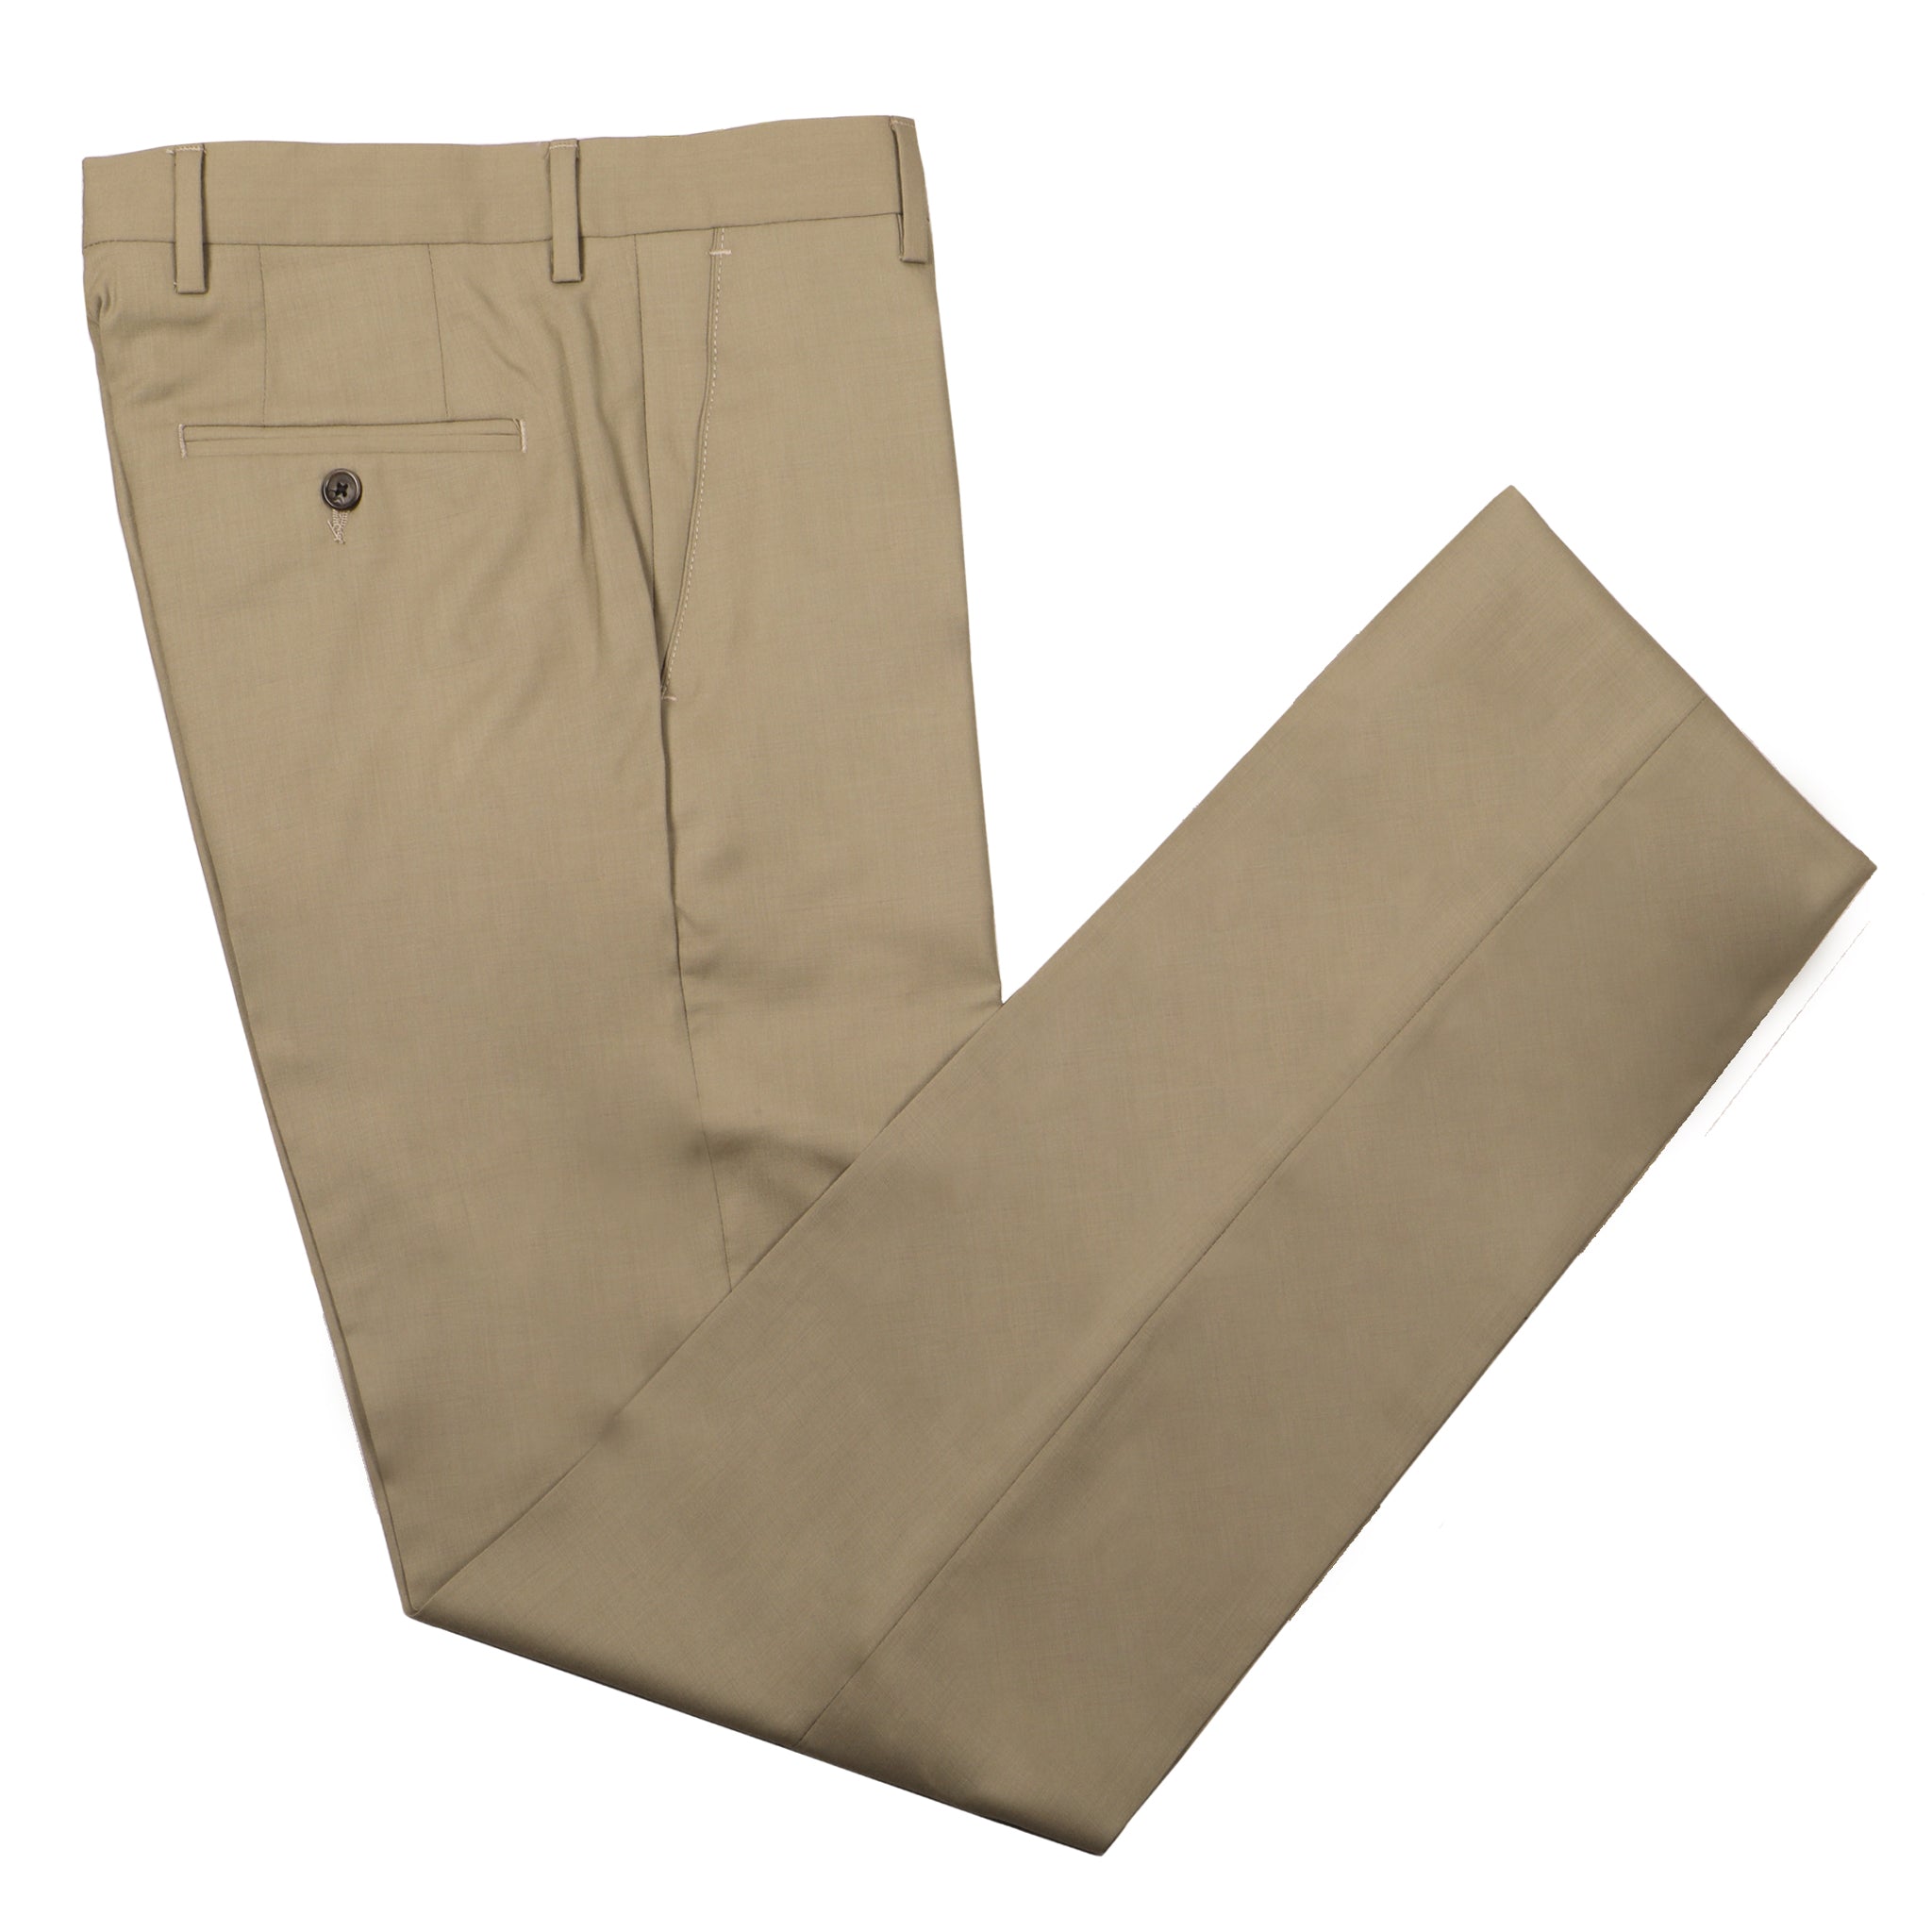 O'Connell's plain front Wool Cavalry Twill Trousers - Brown - Men's  Clothing, Traditional Natural shouldered clothing, preppy apparel